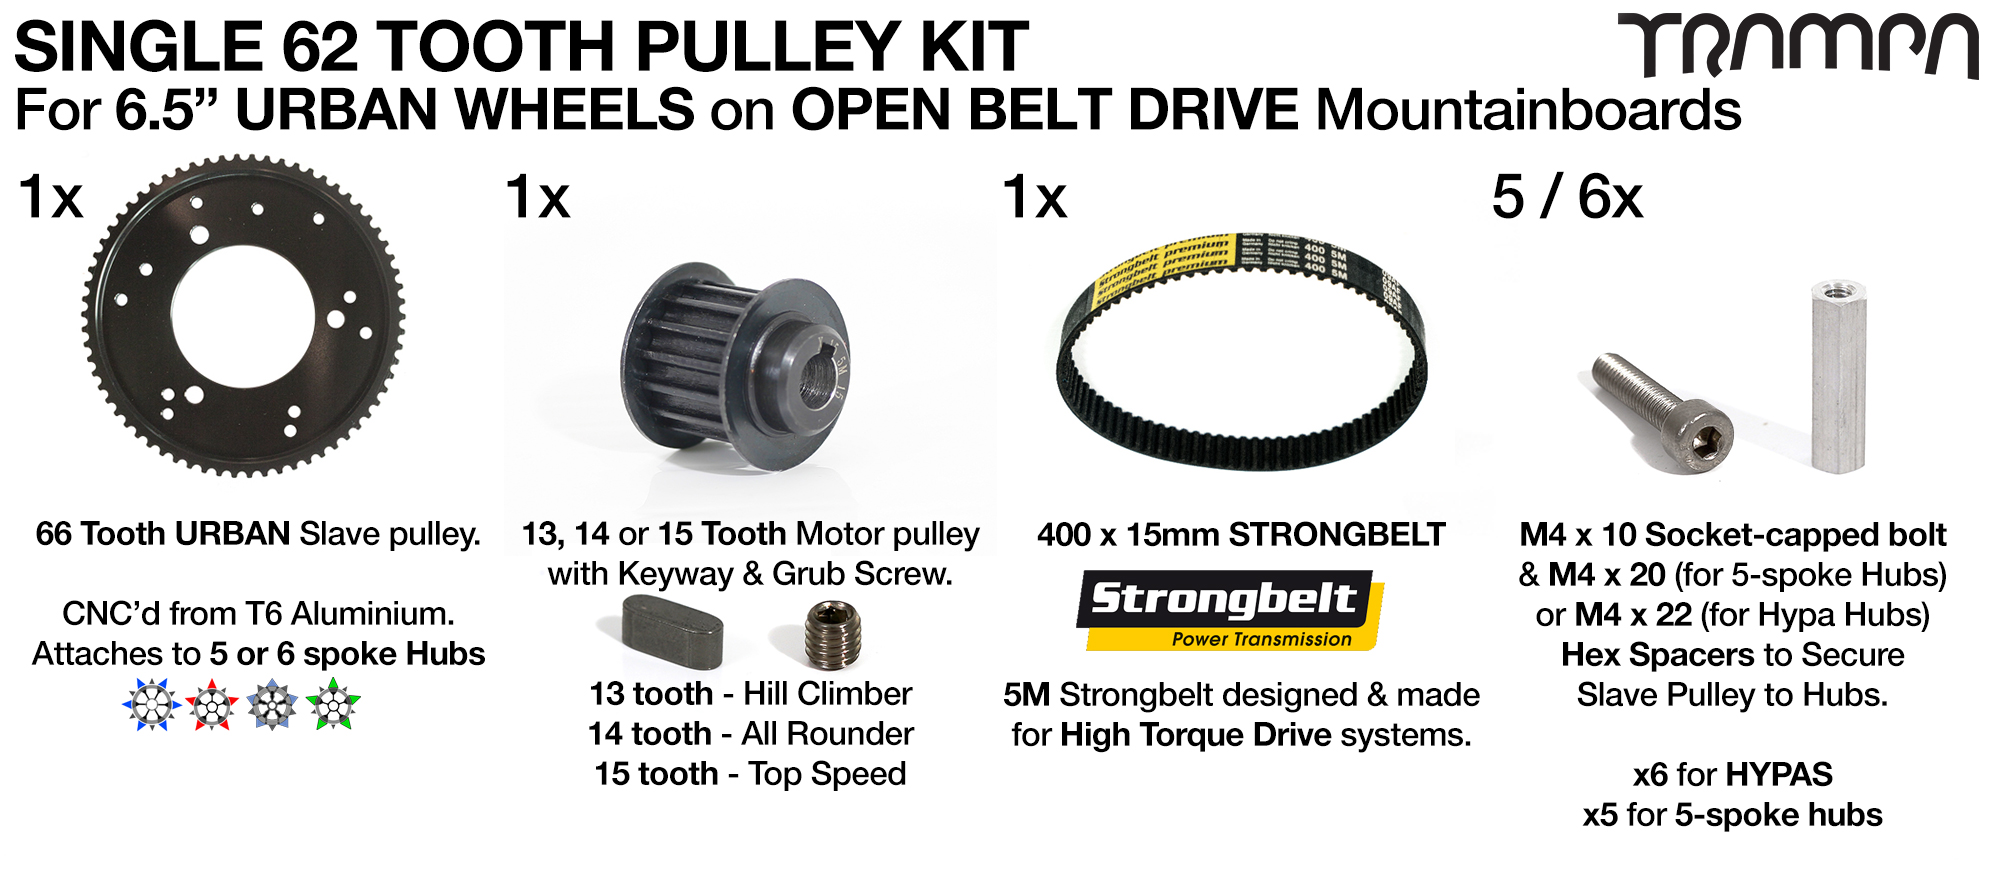 Open Belt Drive Pulley Kit with 400mm x 15mm Belt for 62 Tooth Slave to be used with 6.5 Inch URBAN Wheels